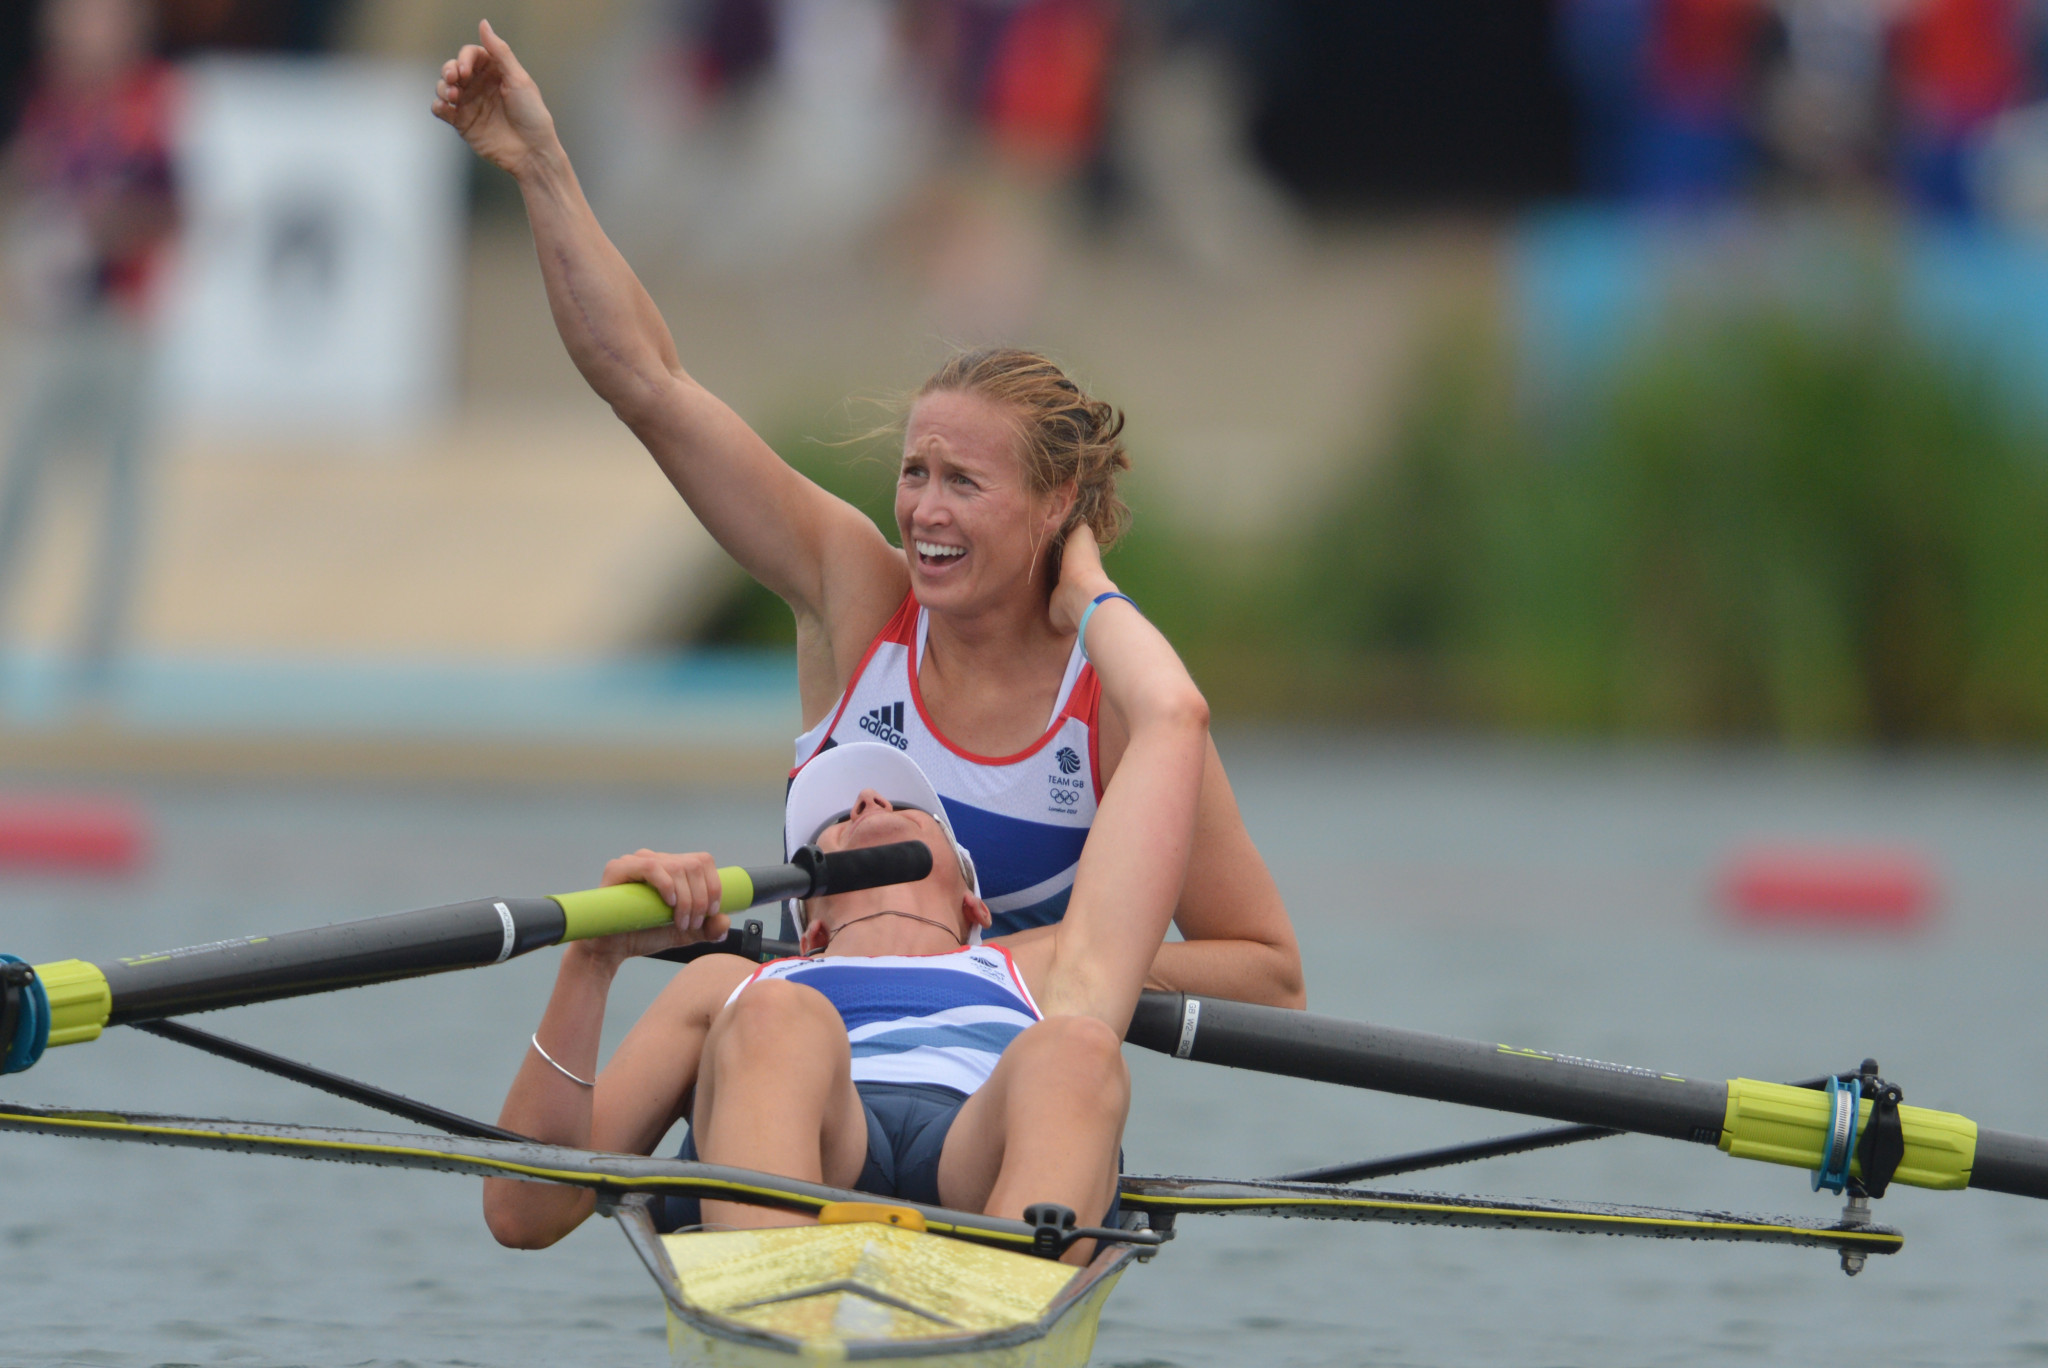 Helen Glover and Heather Stanning won Britain's first gold medal at London 2012 ©Getty Images